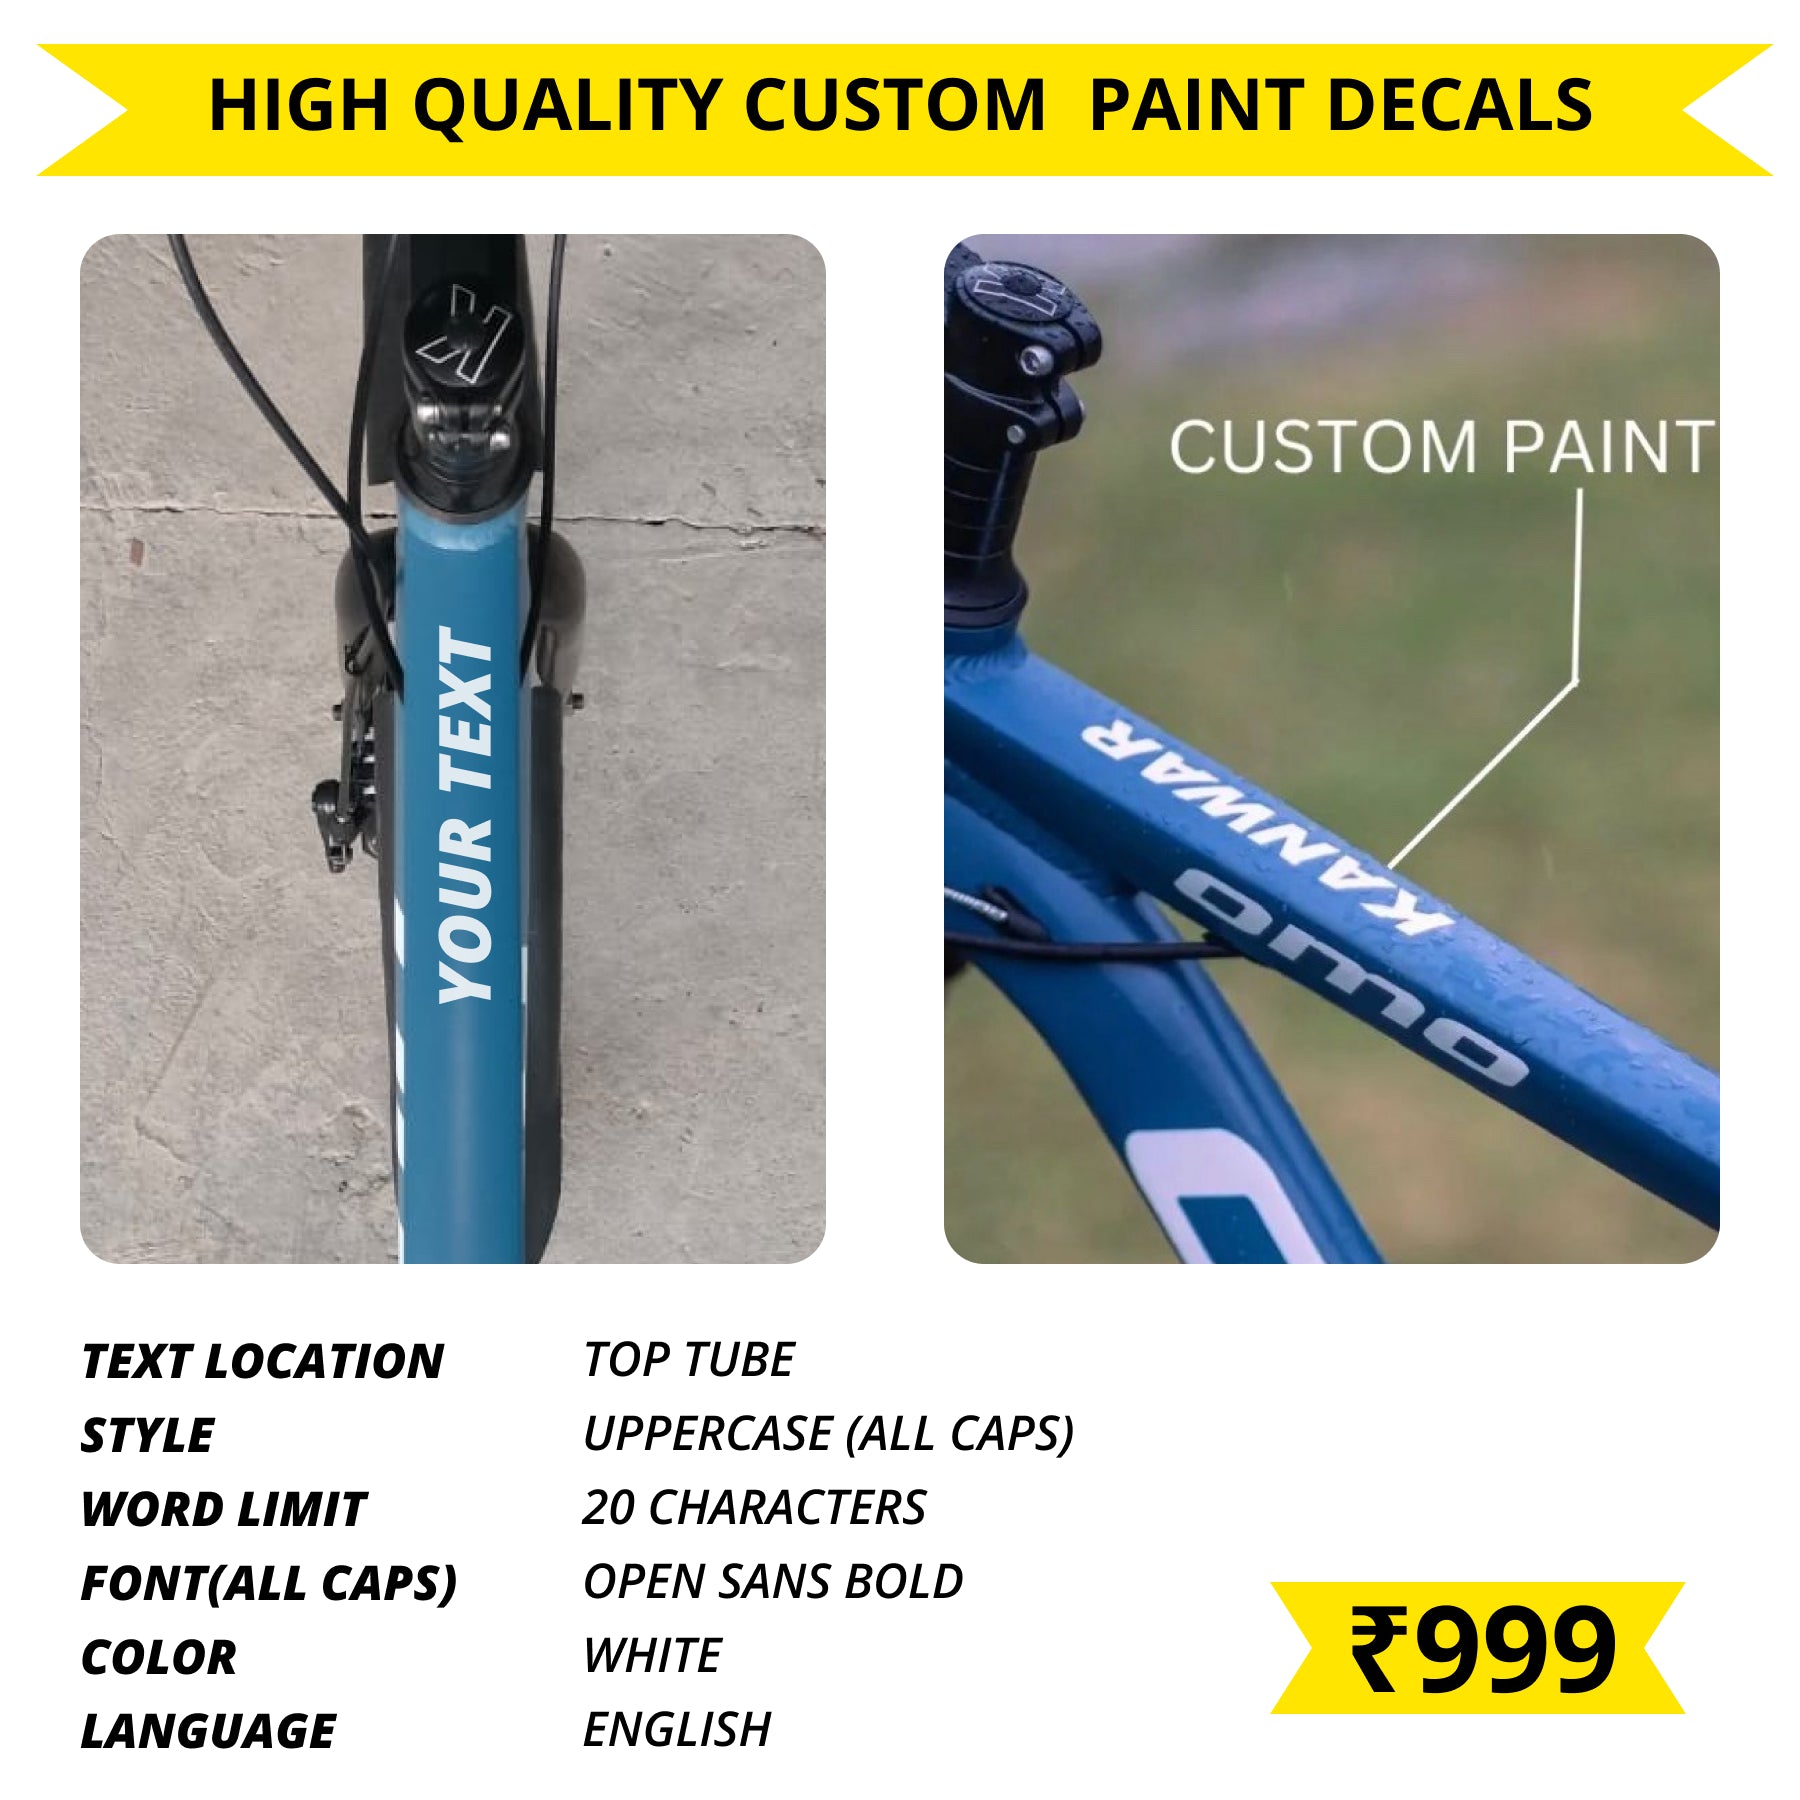 Get custom name message text printed in white paint of choice on your omo bike in Rs 999